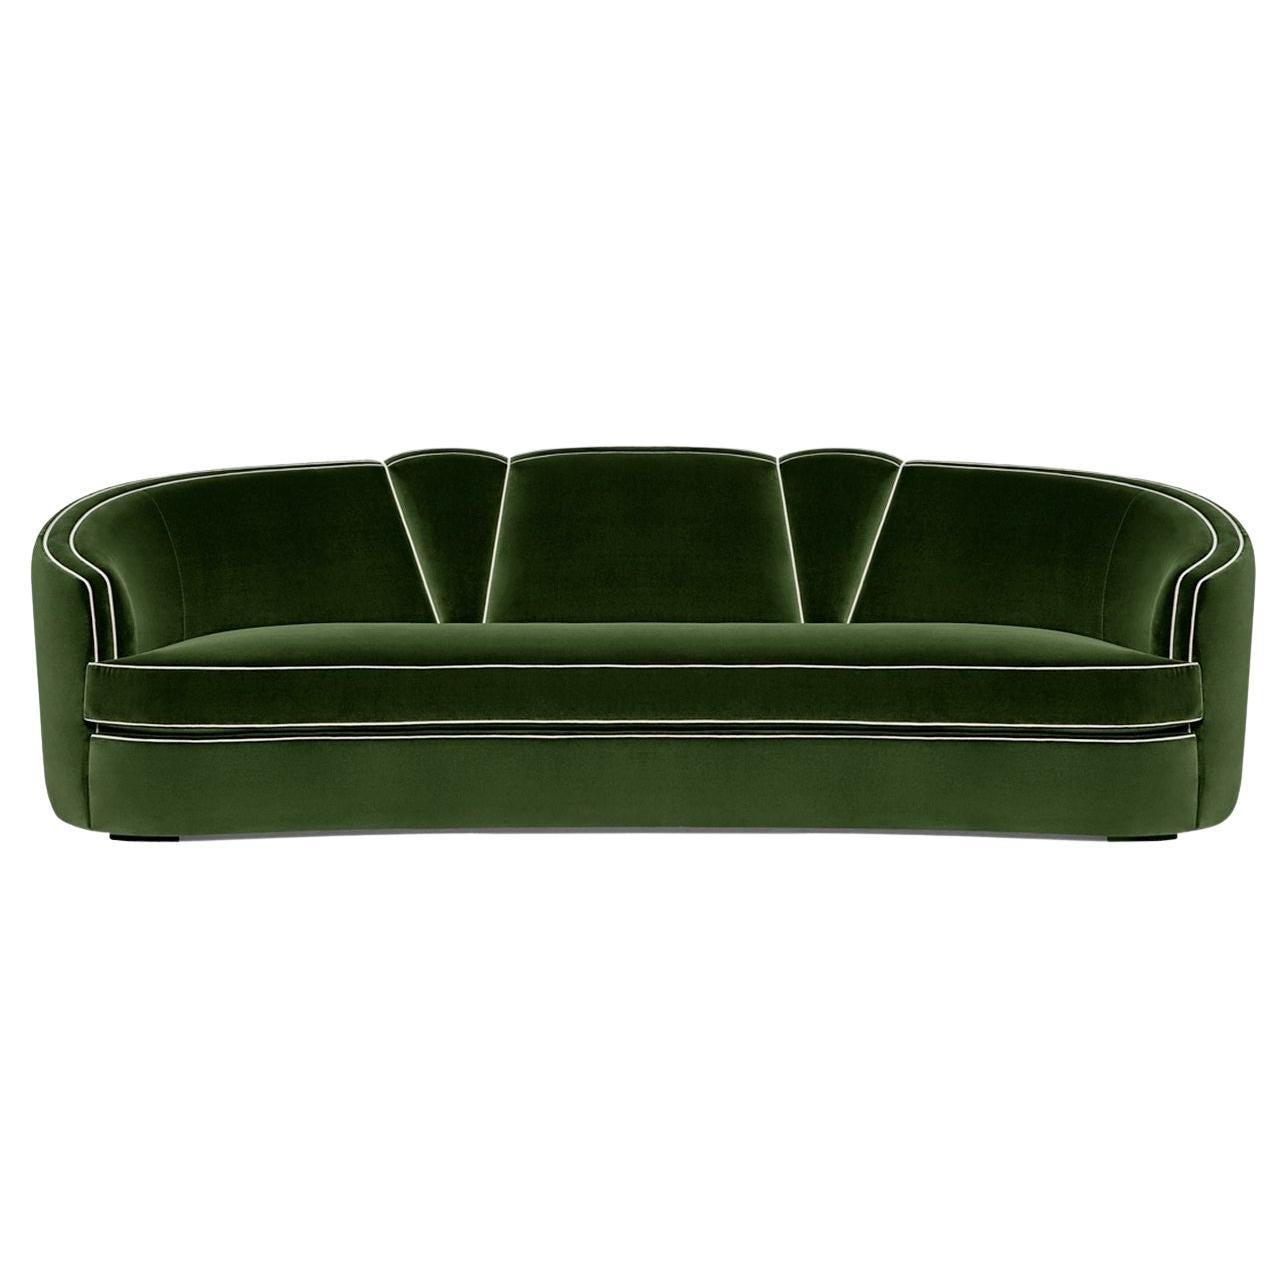 Art Deco Style Sofa in Velvet with Toned Pipping